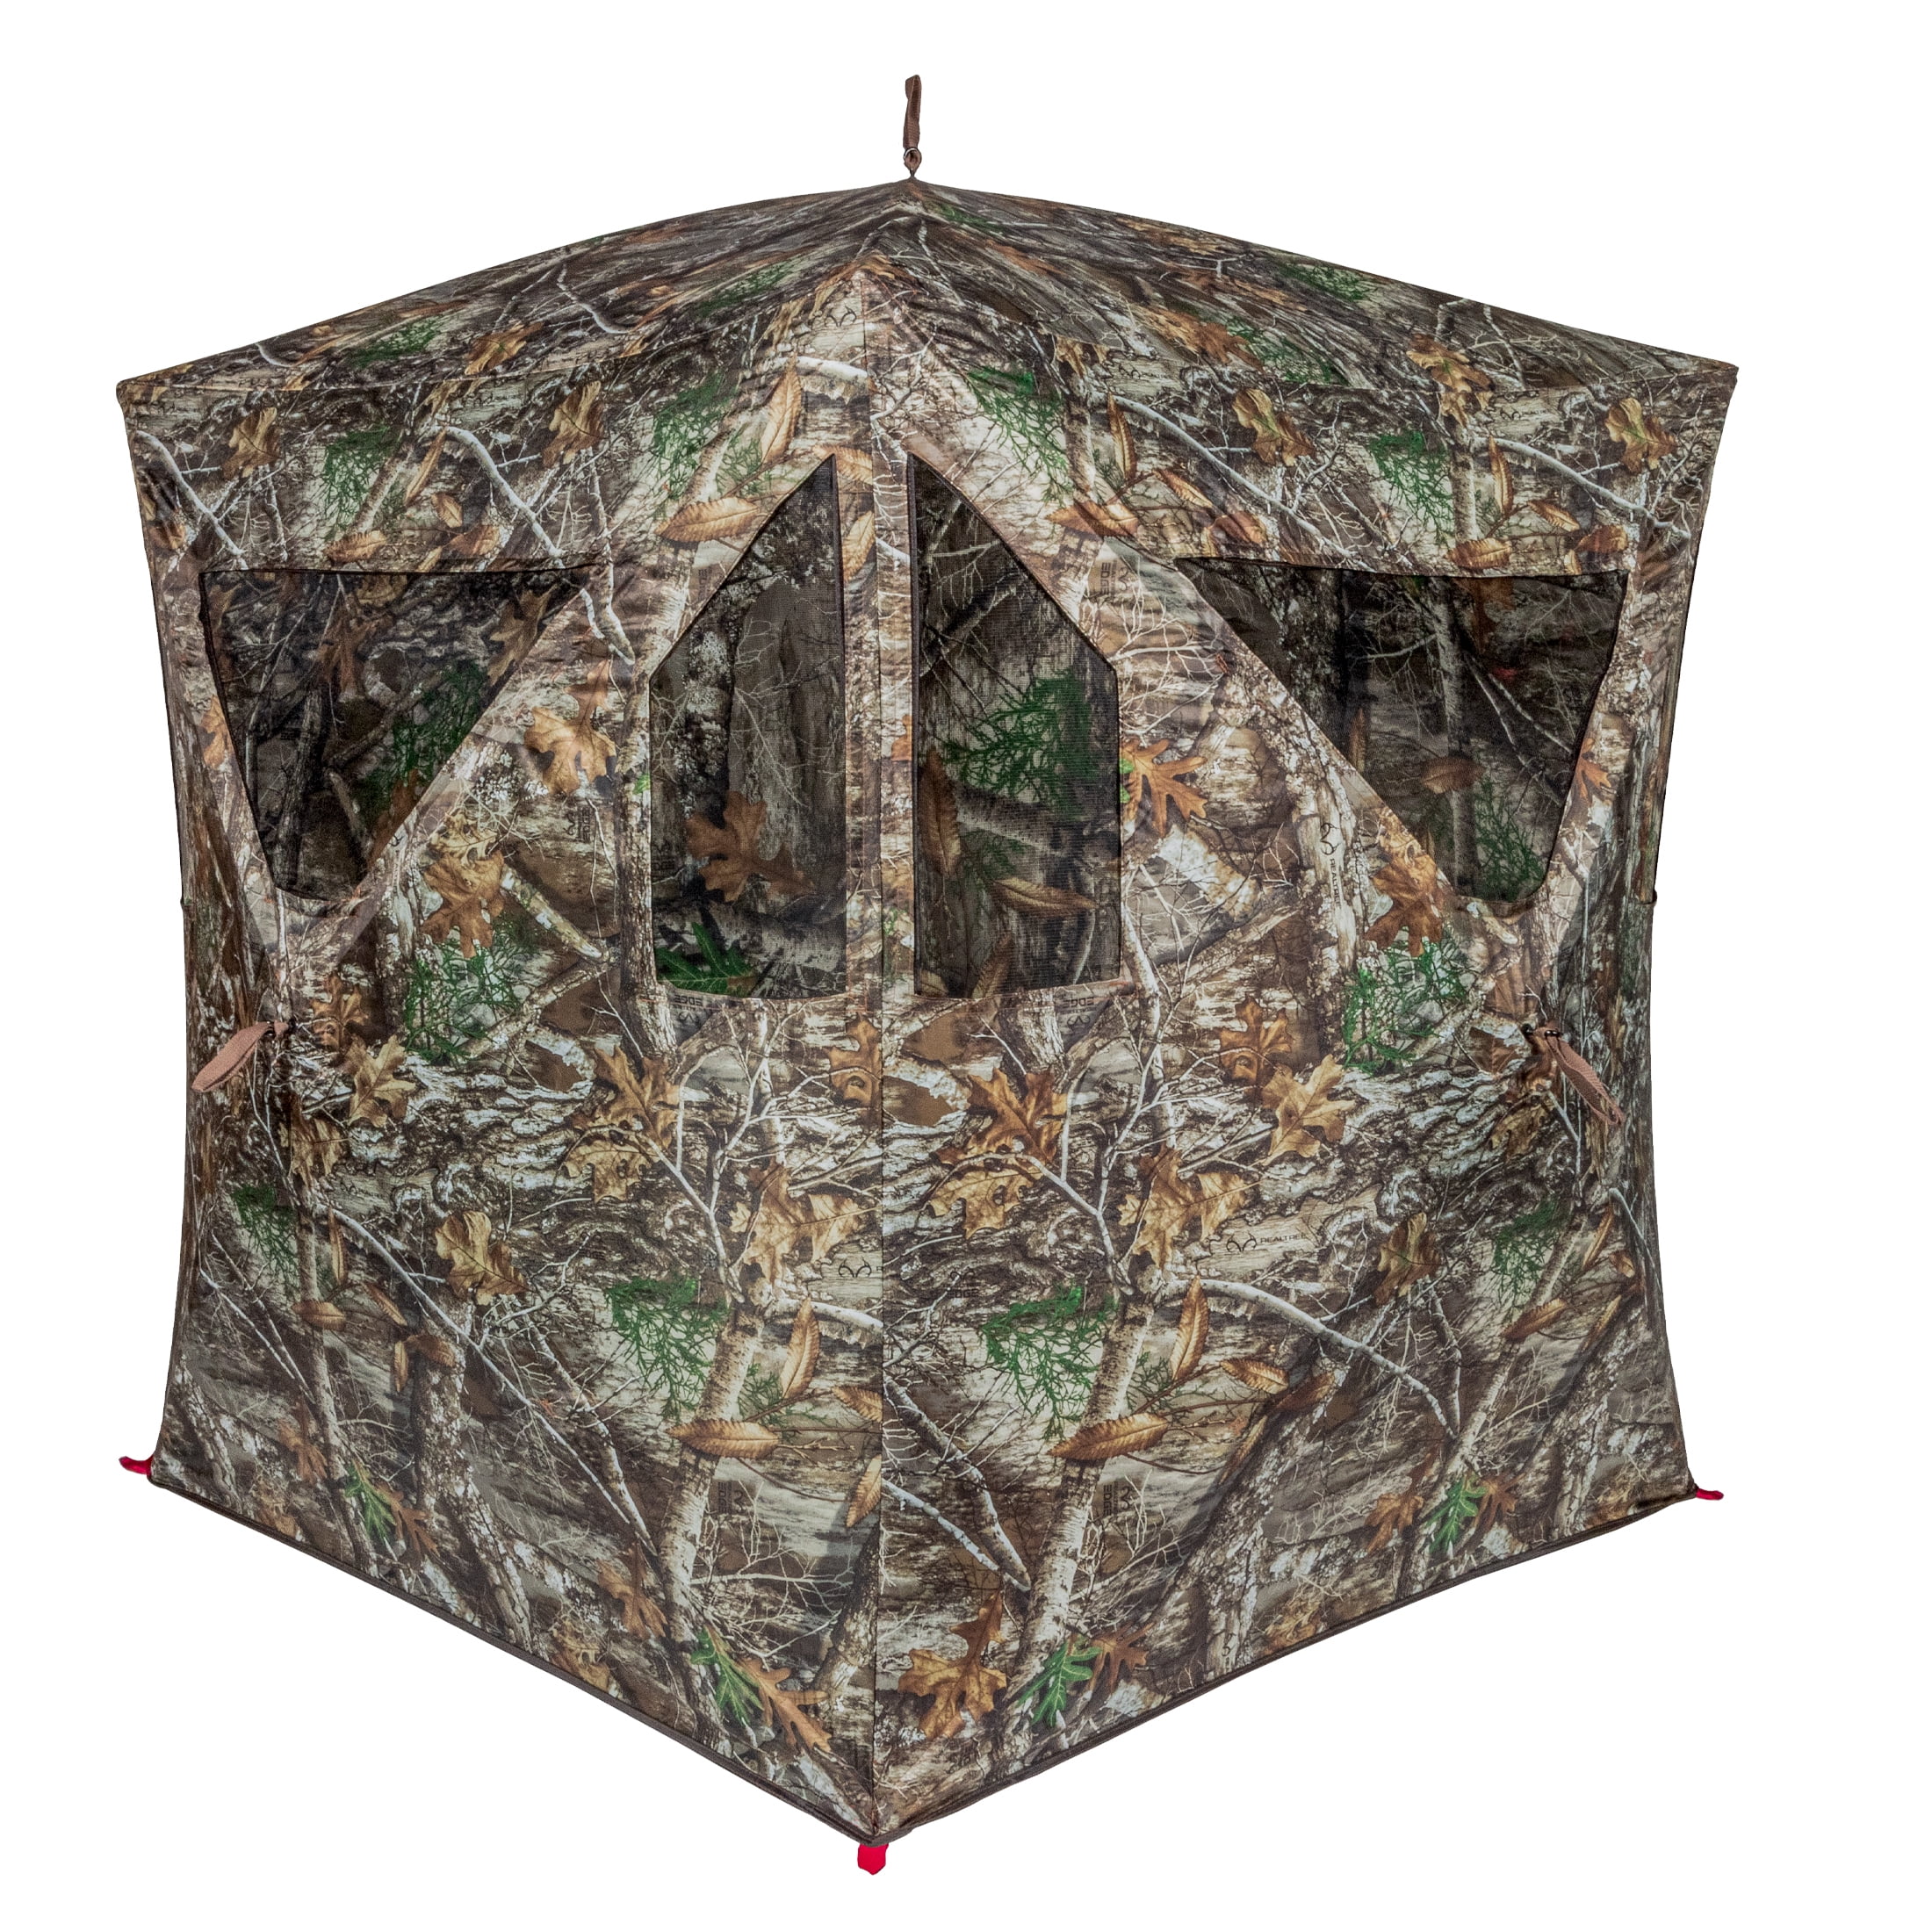 Ground Hunting Blind Deer Pop Up Camo Hunter Portable Durable Weather Proof Mesh 